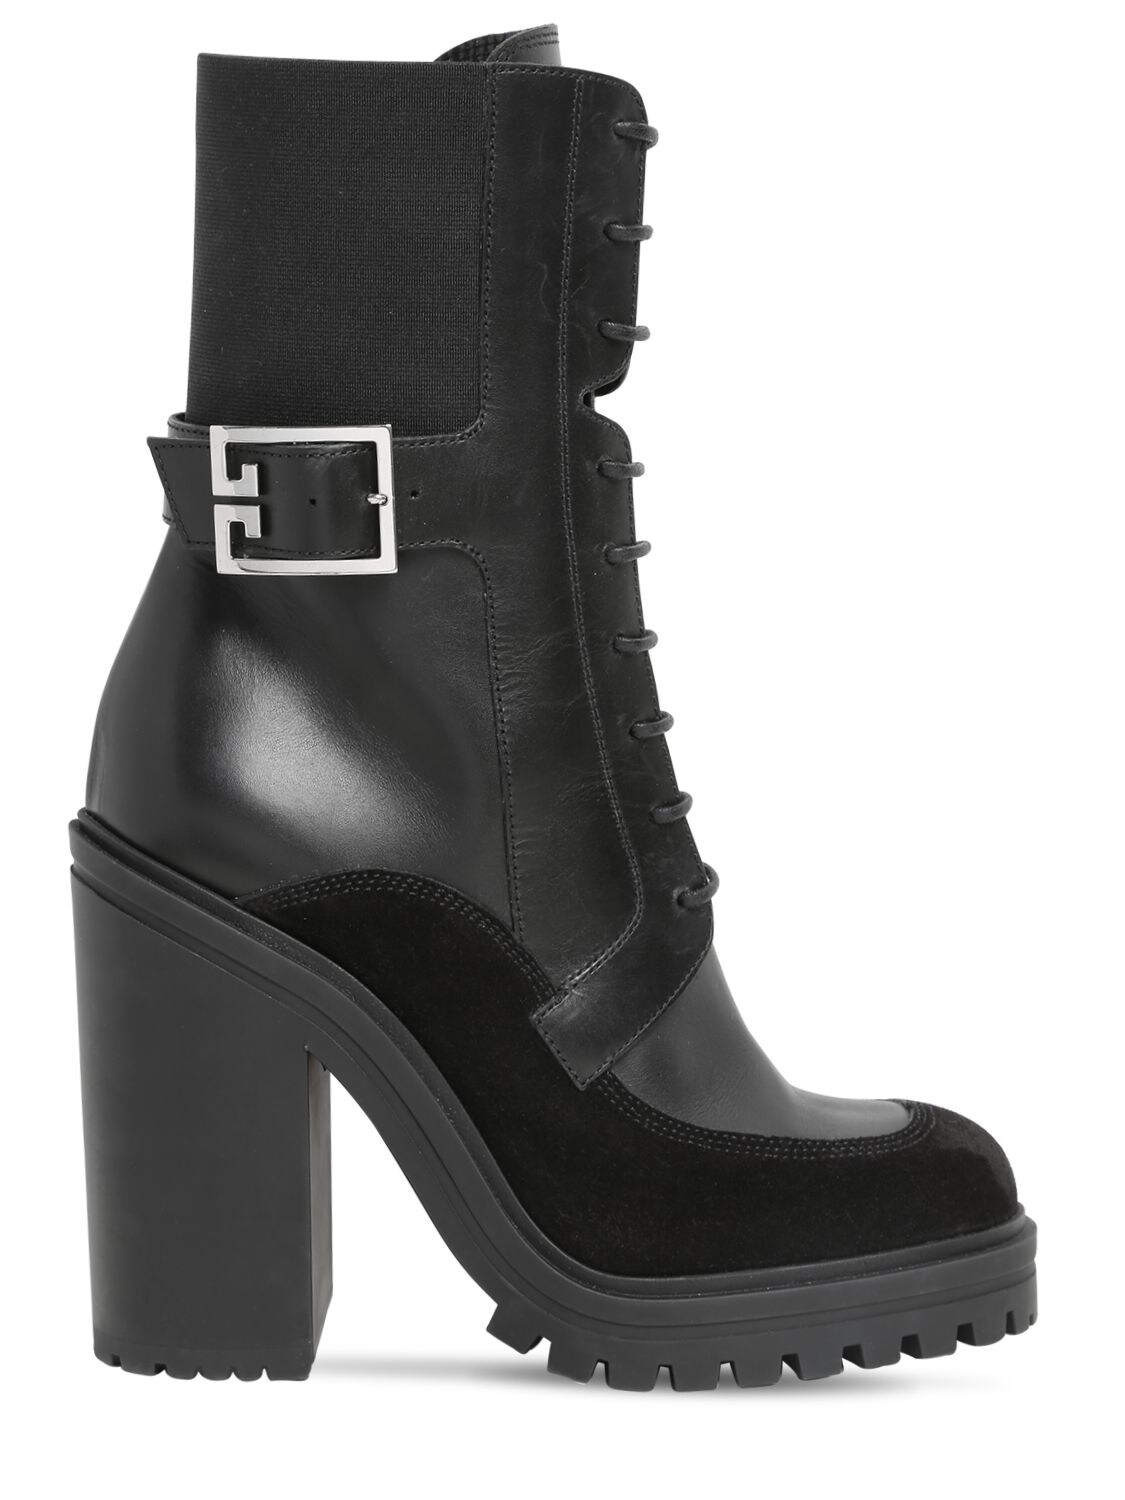 GIVENCHY 120MM LEATHER & SUEDE LACE-UP BOOTS,68IG59006-MDAx0